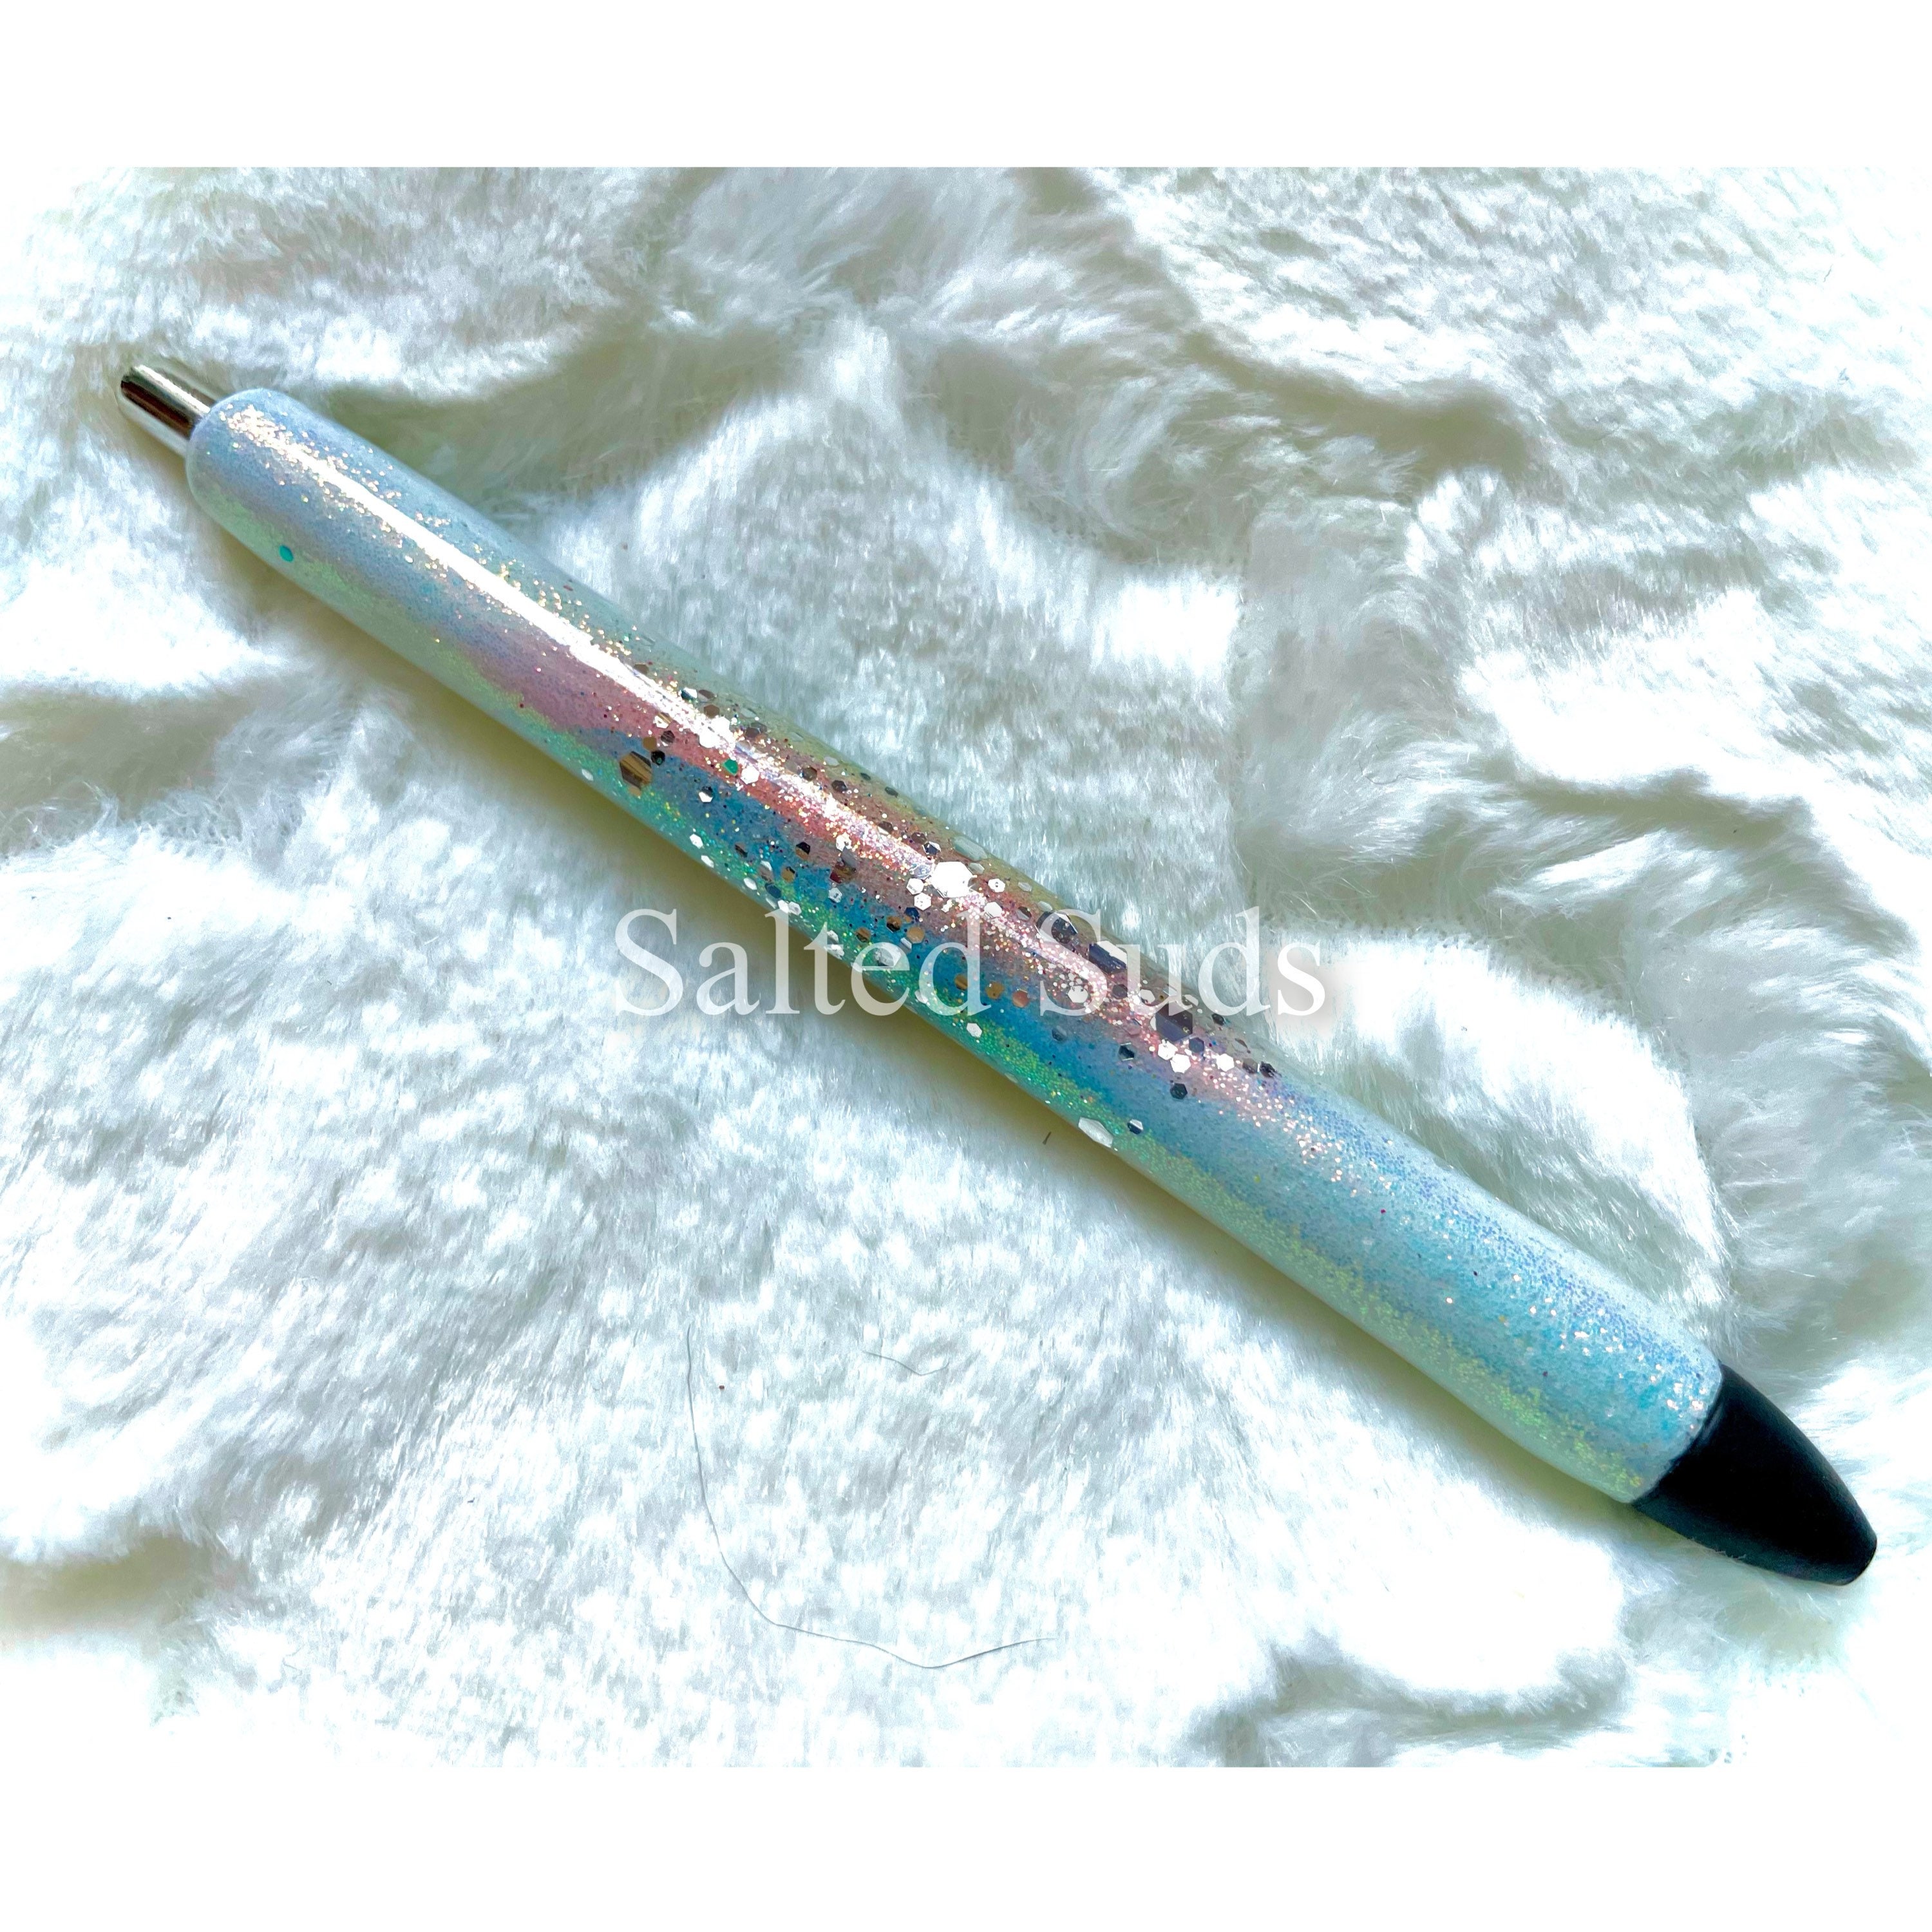 Lighted Unicorn Pen with Glitter Rainbow Colors – The Pink Pigs